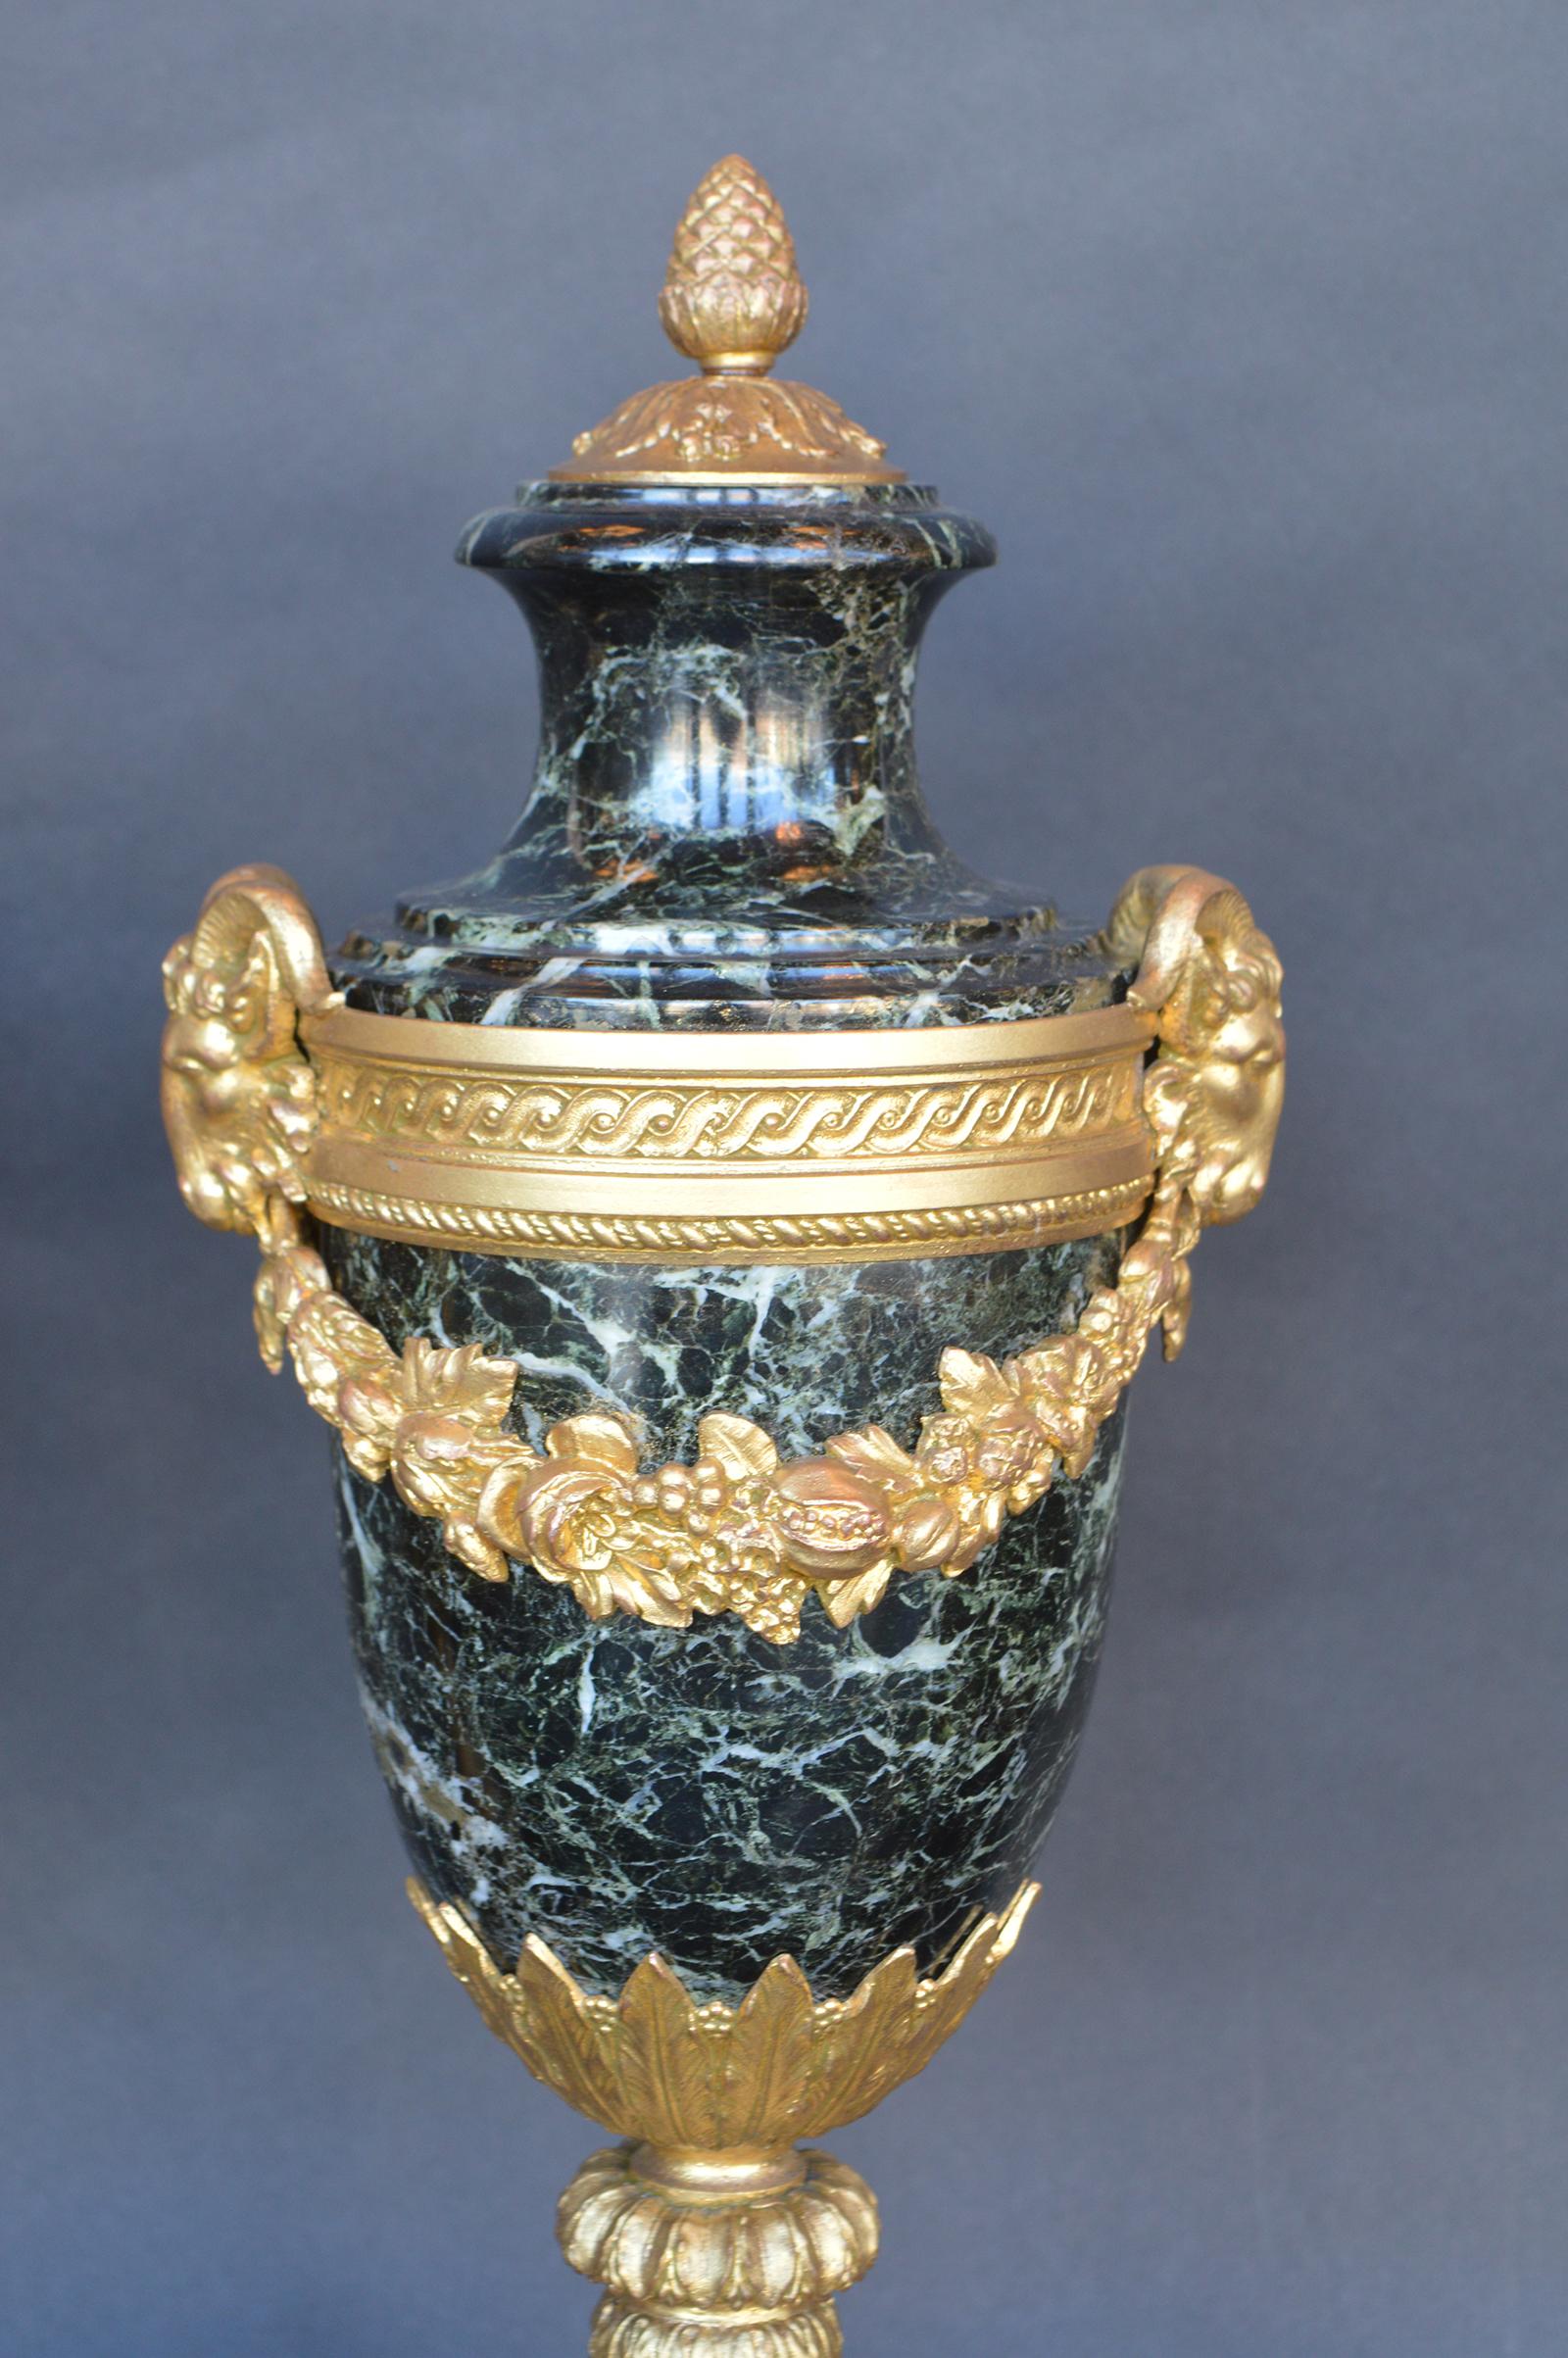 Pair of green marble and bronze urns, 19th century, French.